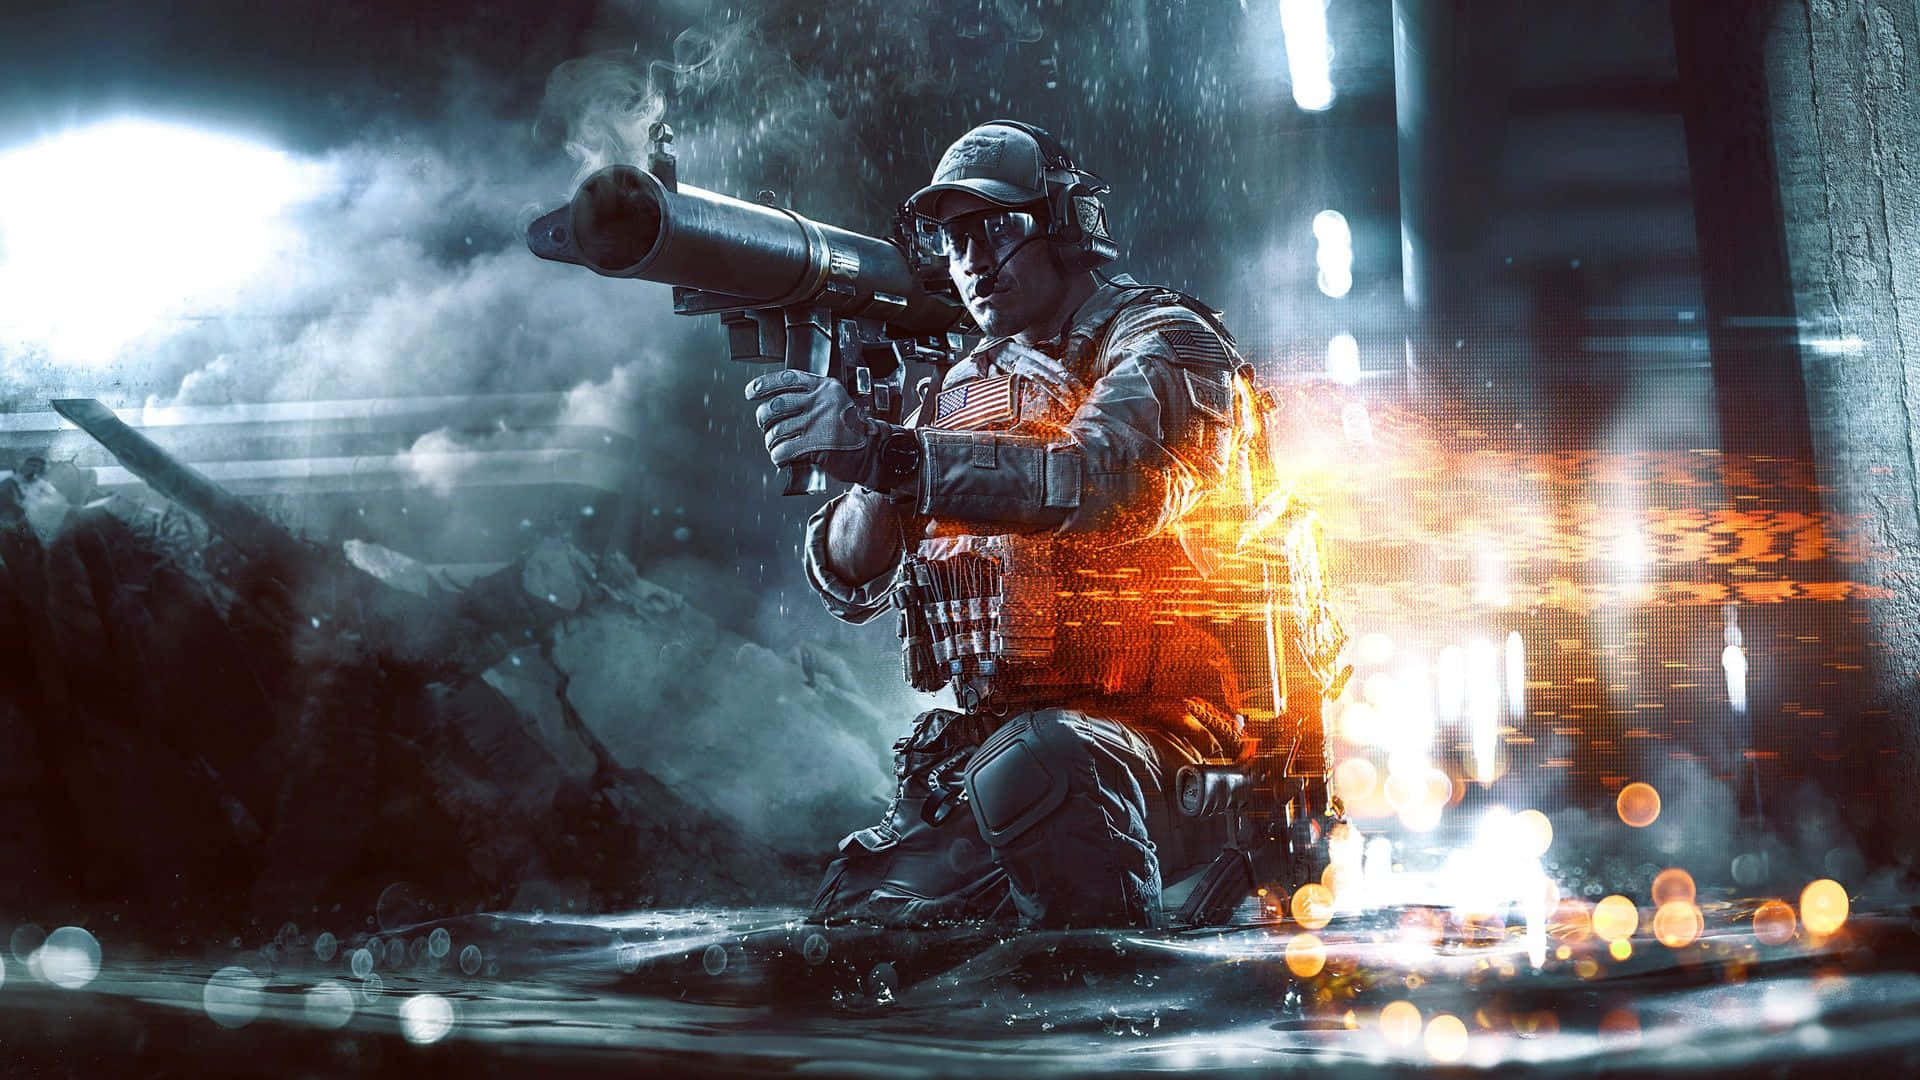 Experience intense military combat with Battlefield 4